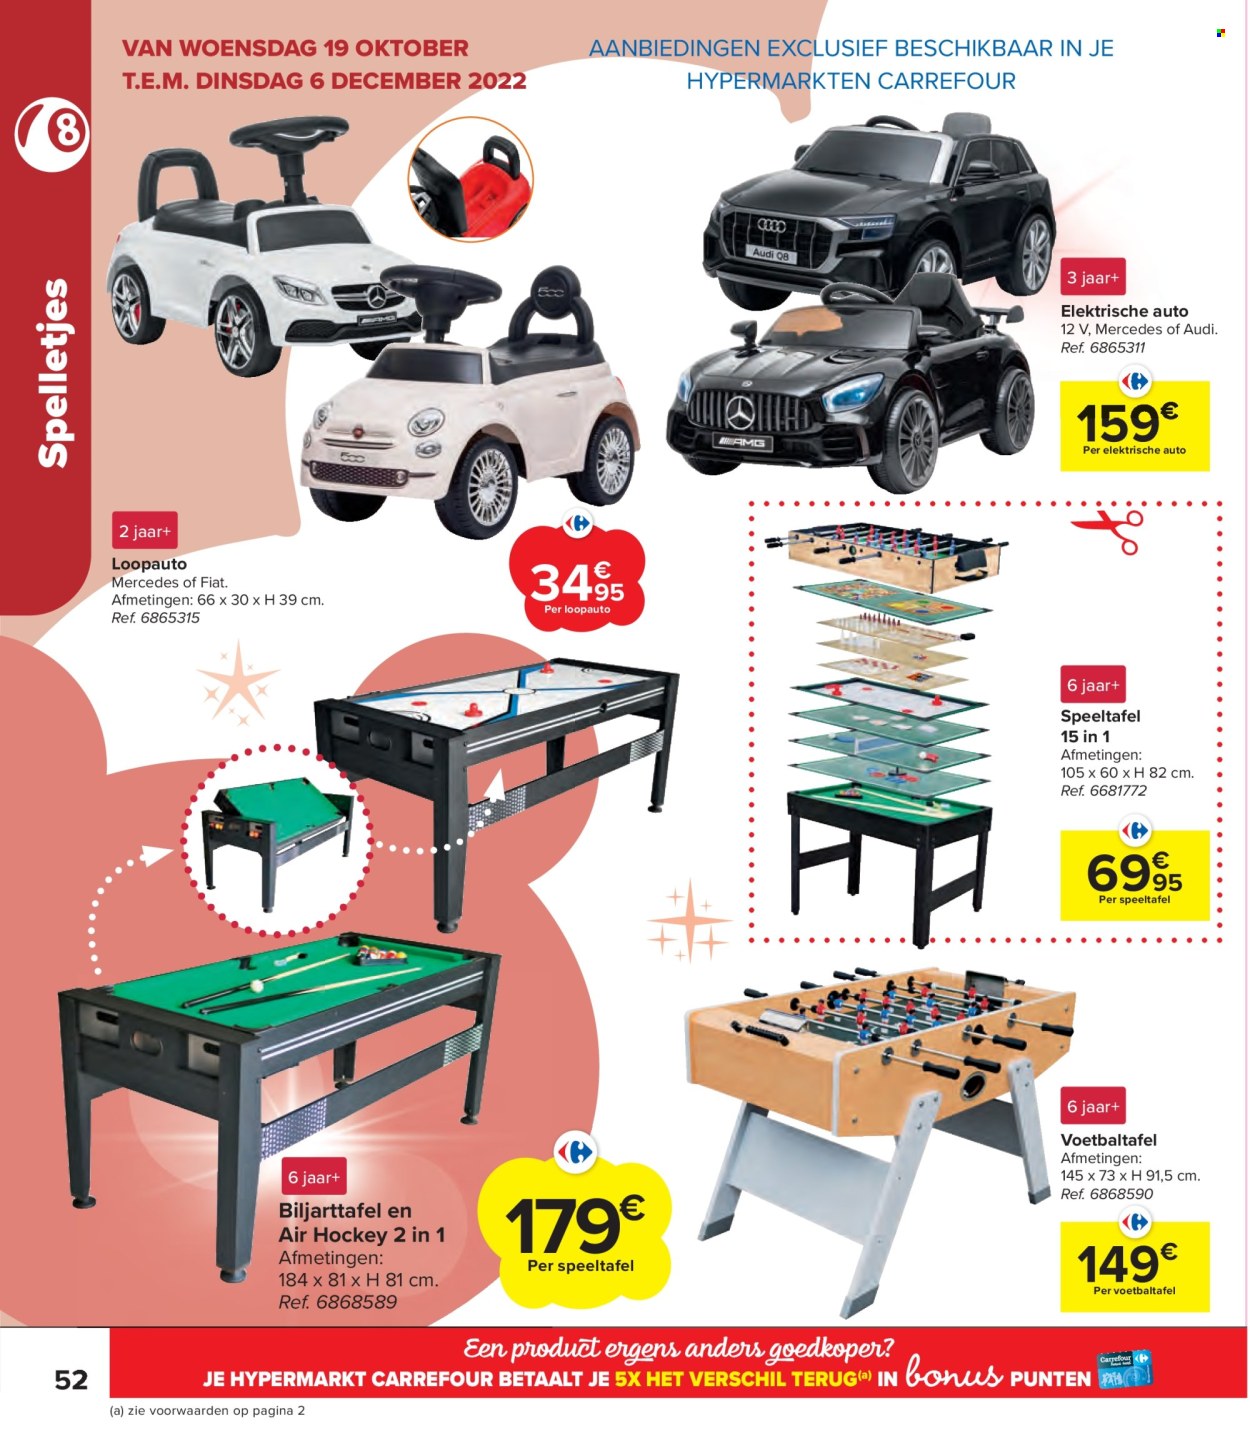 Catalogue Carrefour hypermarkt - 19.10.2022 - 6.12.2022. Page 52.